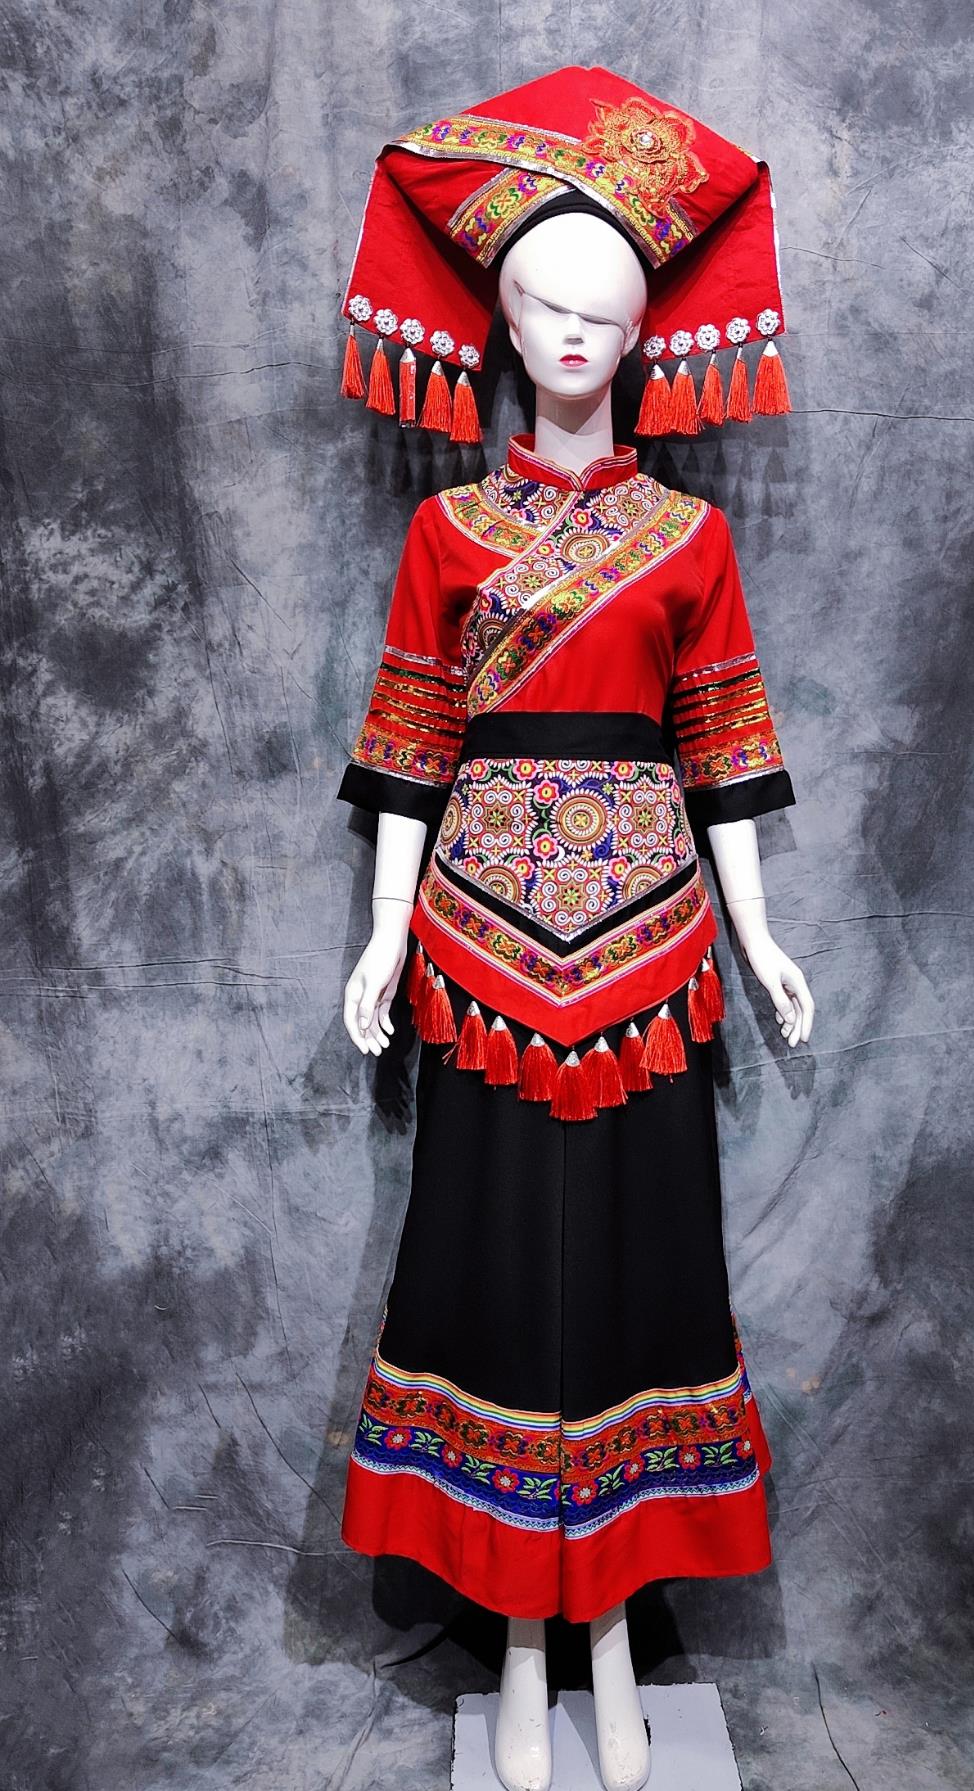 Chinese Ethnic Dance Costume China Zhuang National Minority Woman Clothing Traditional Guangxi March 3rd Festival Performance Attire